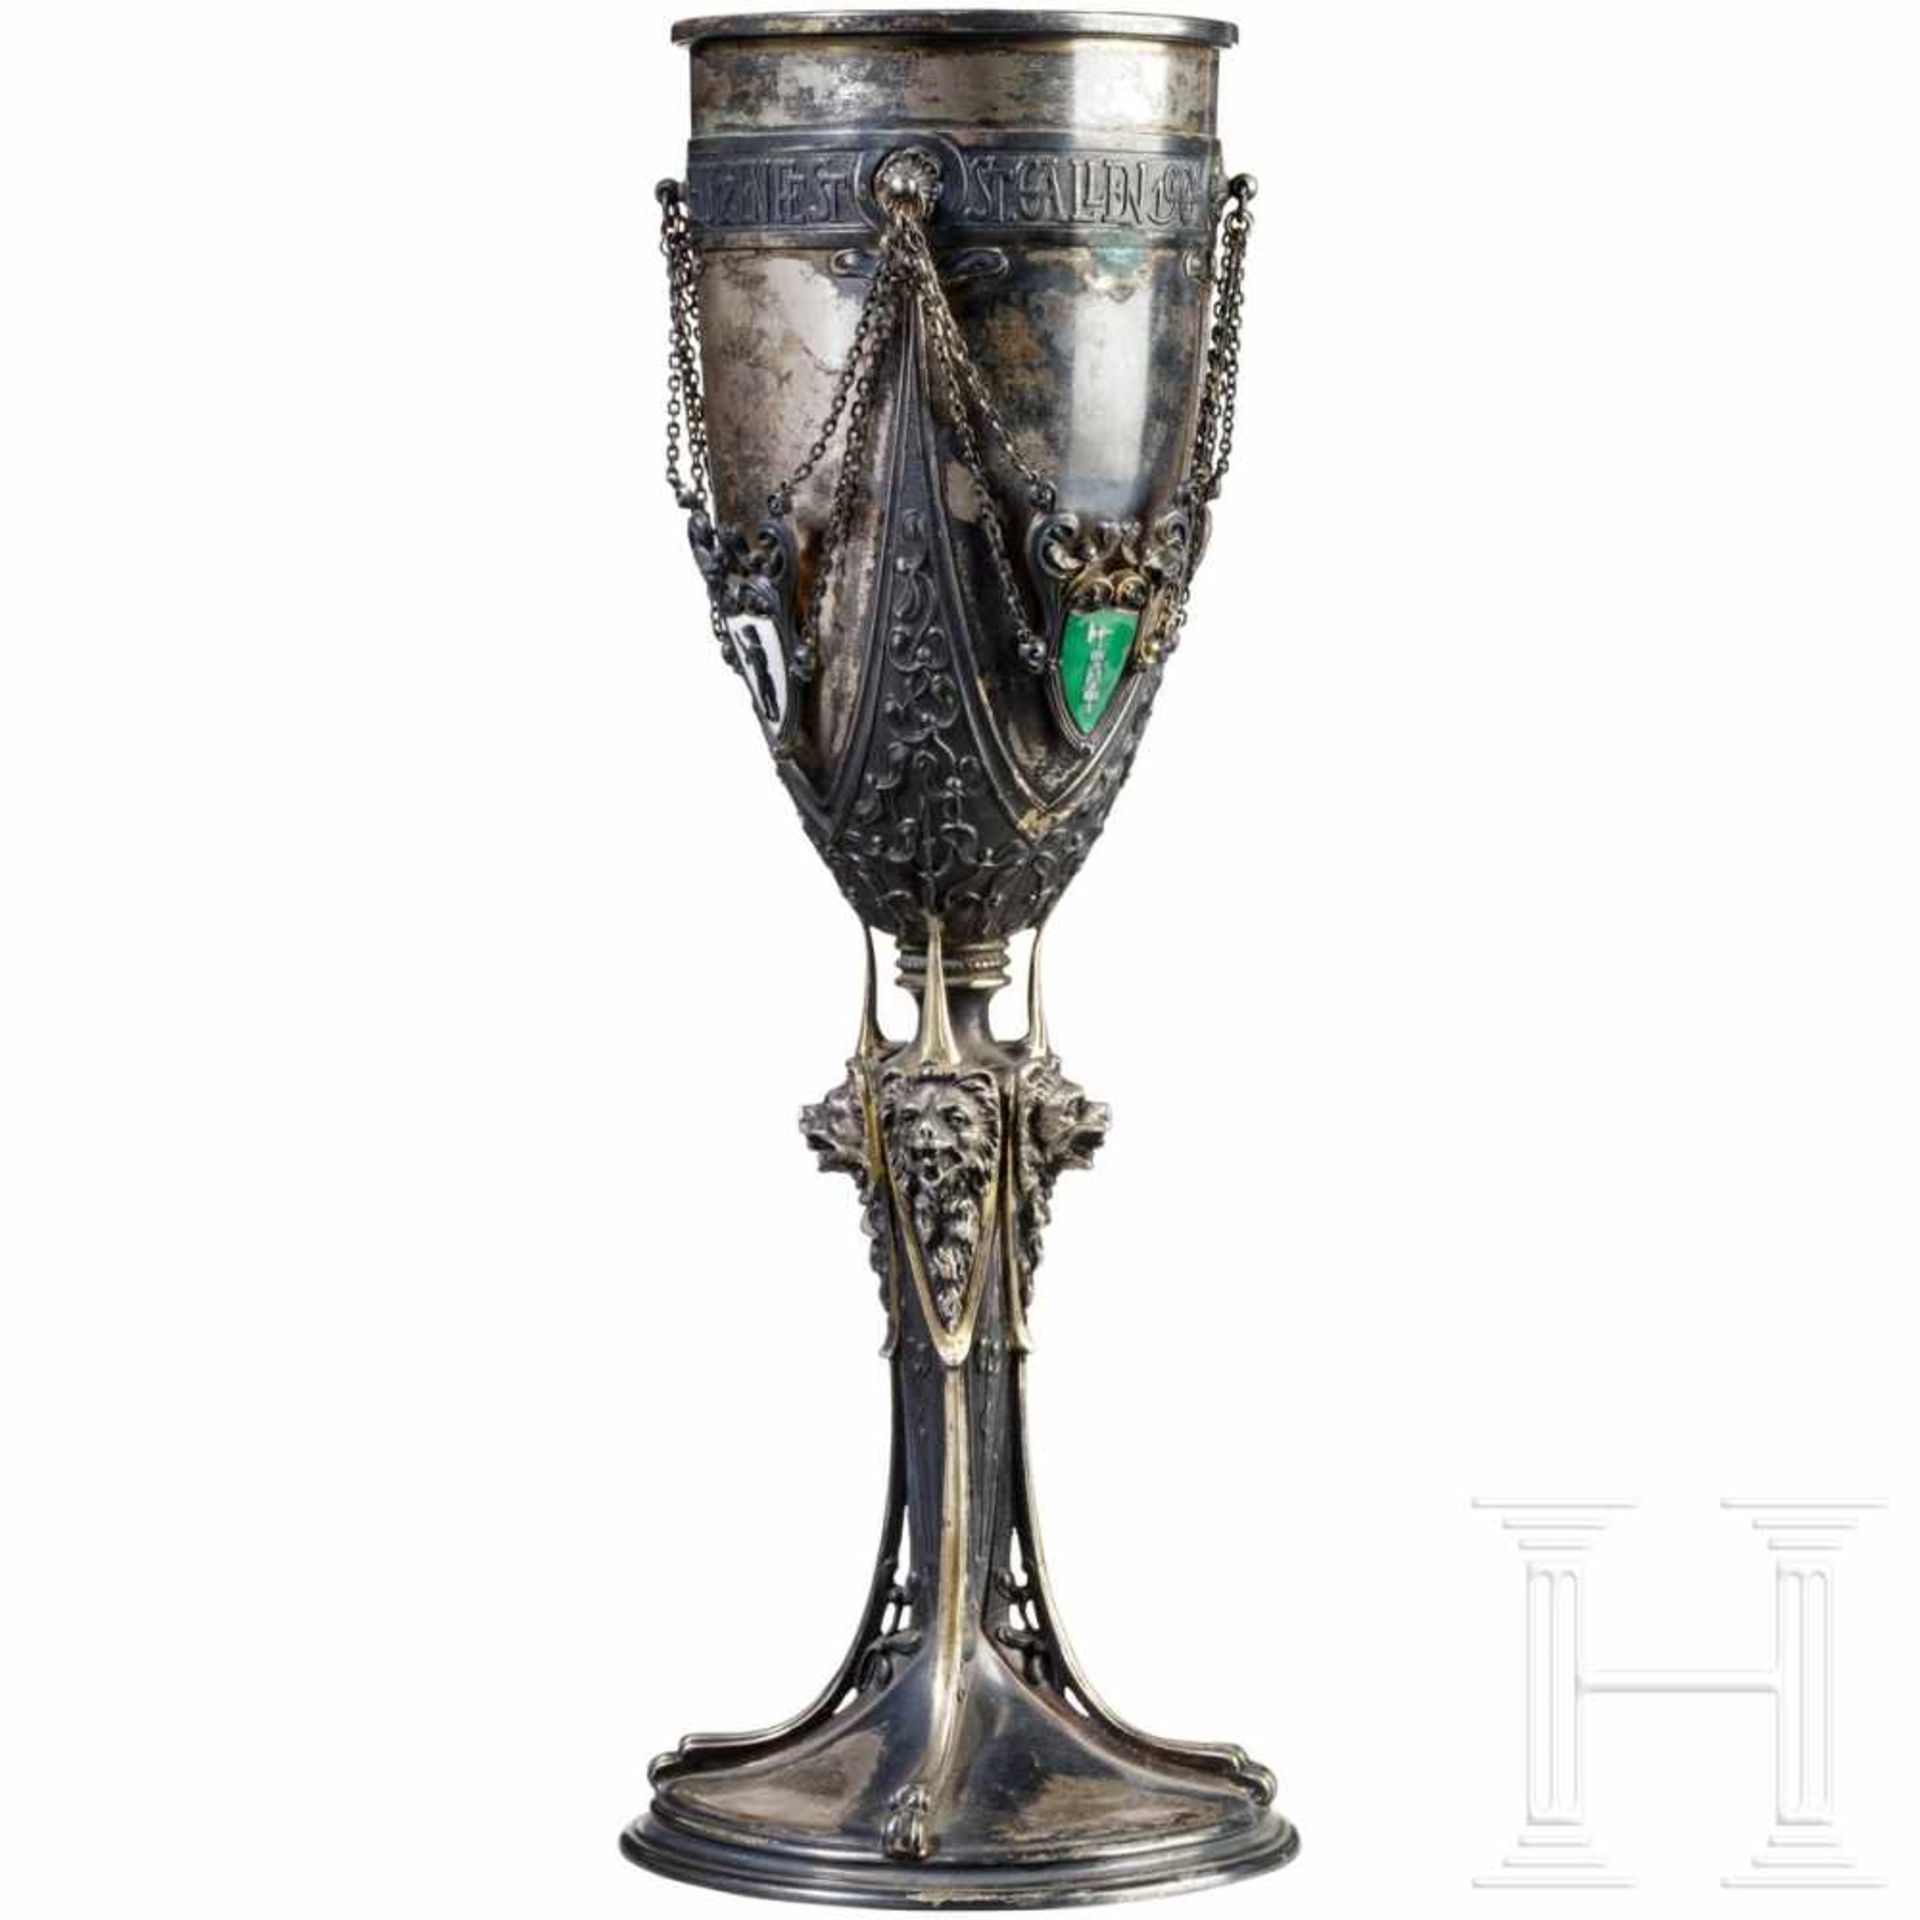 A silver shooting cup "Swiss Federal Shooting Festival St. Gallen 1904"Silber, innen sowie